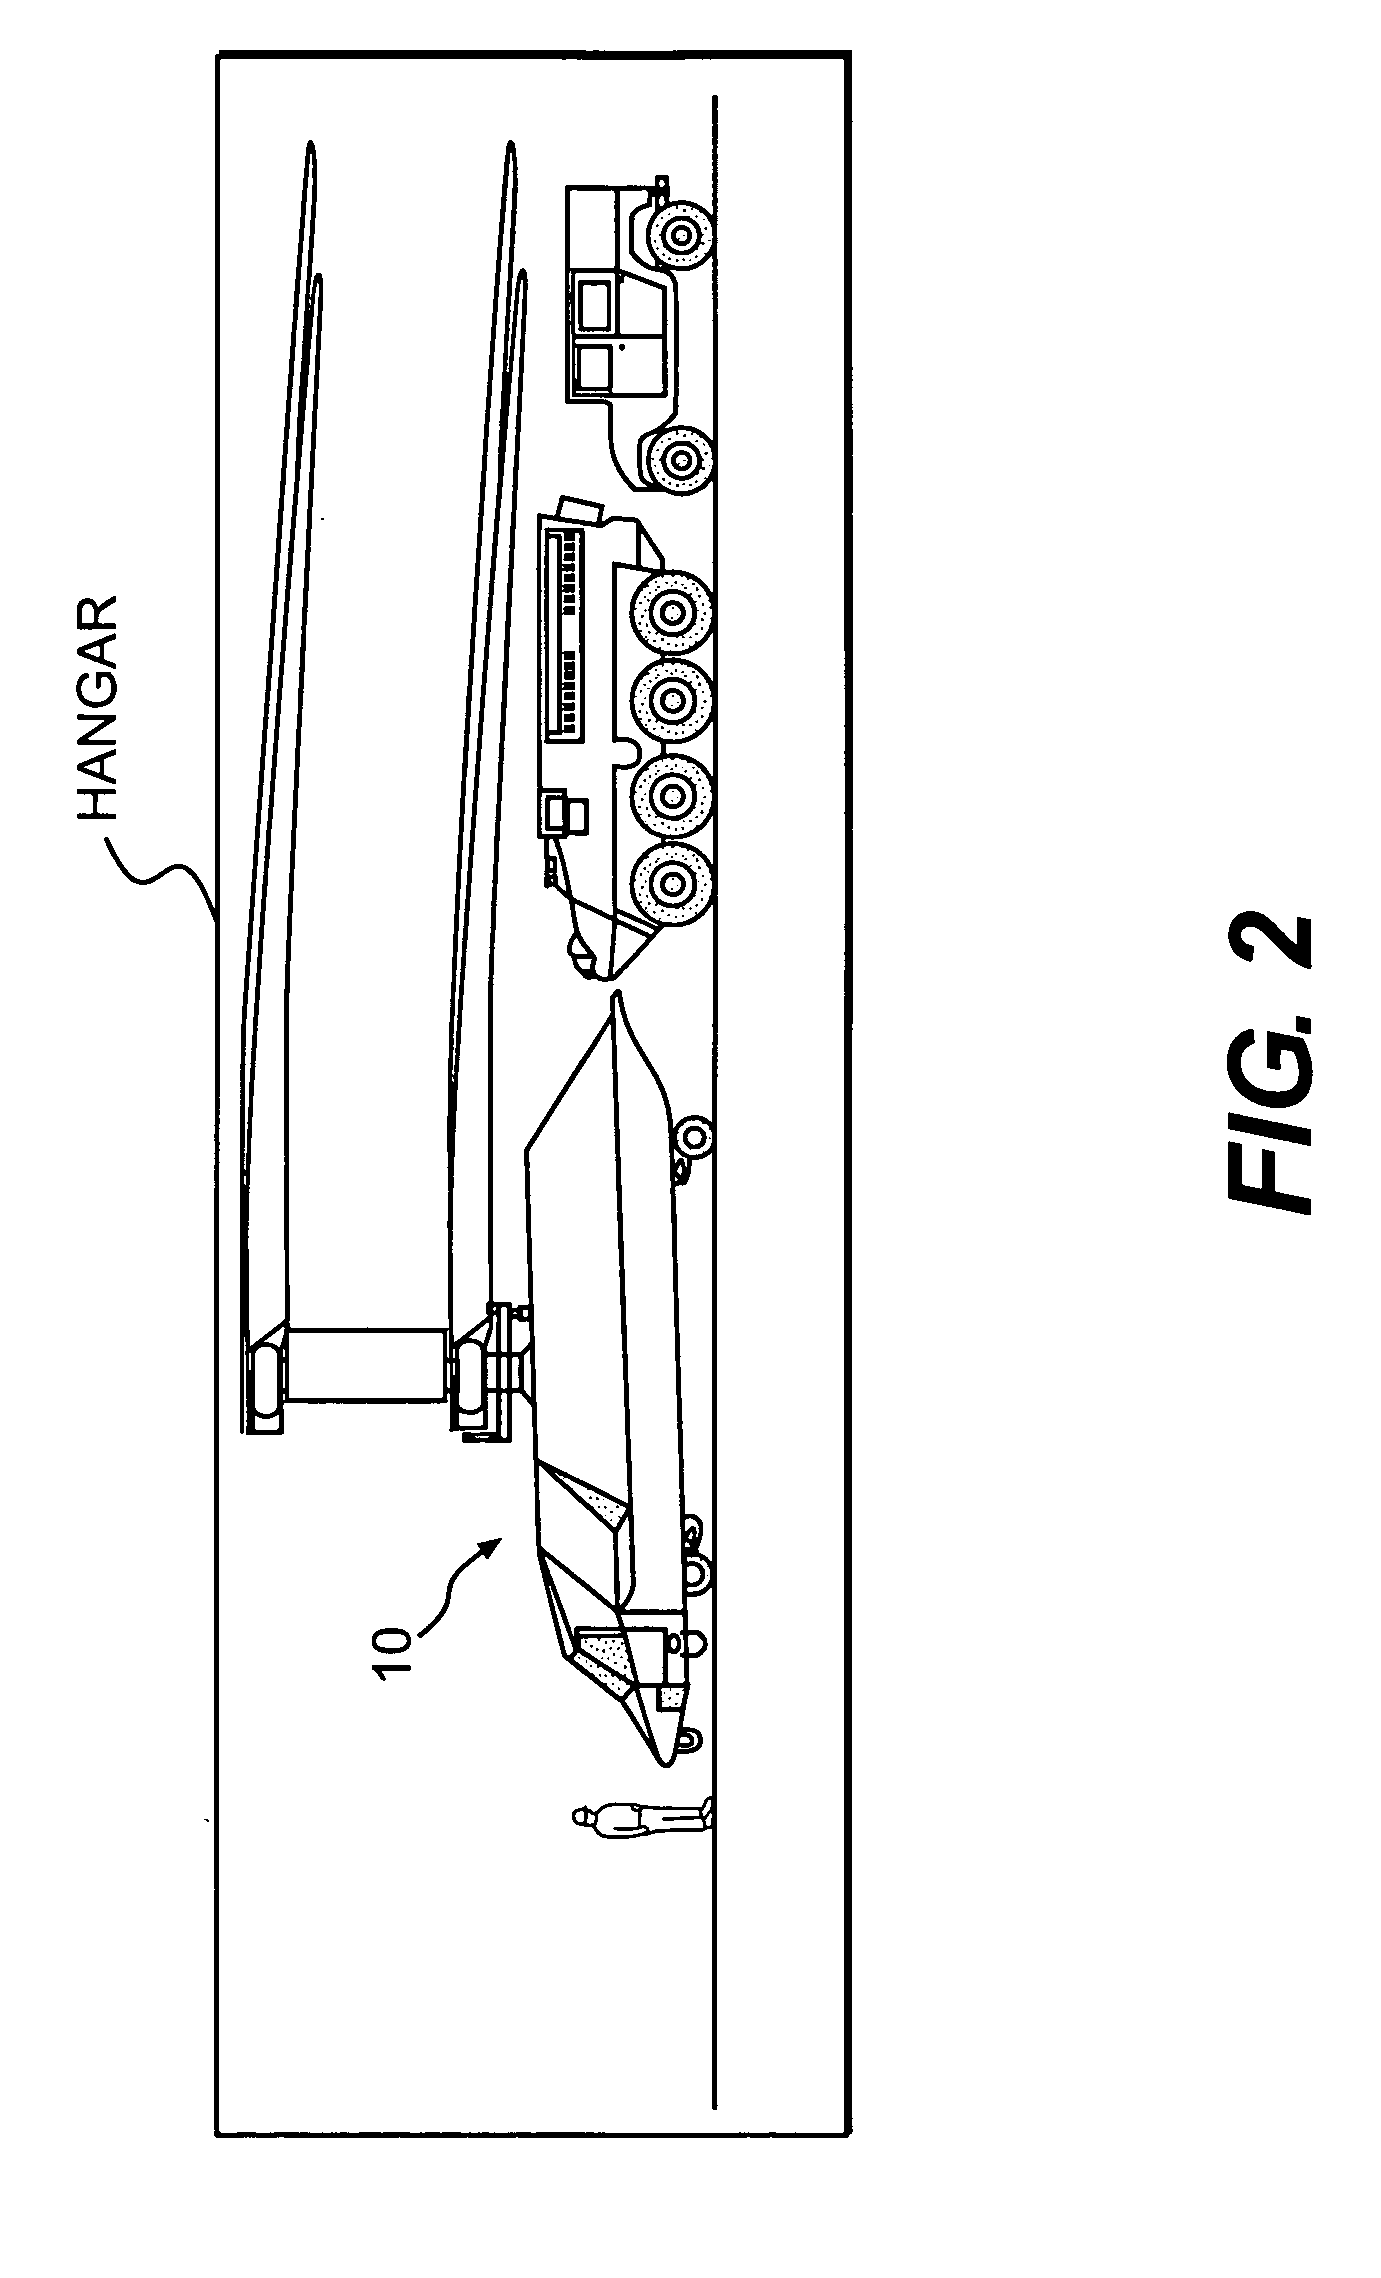 Compact co-axial rotor system for a rotary wing aircraft and a control system therefor